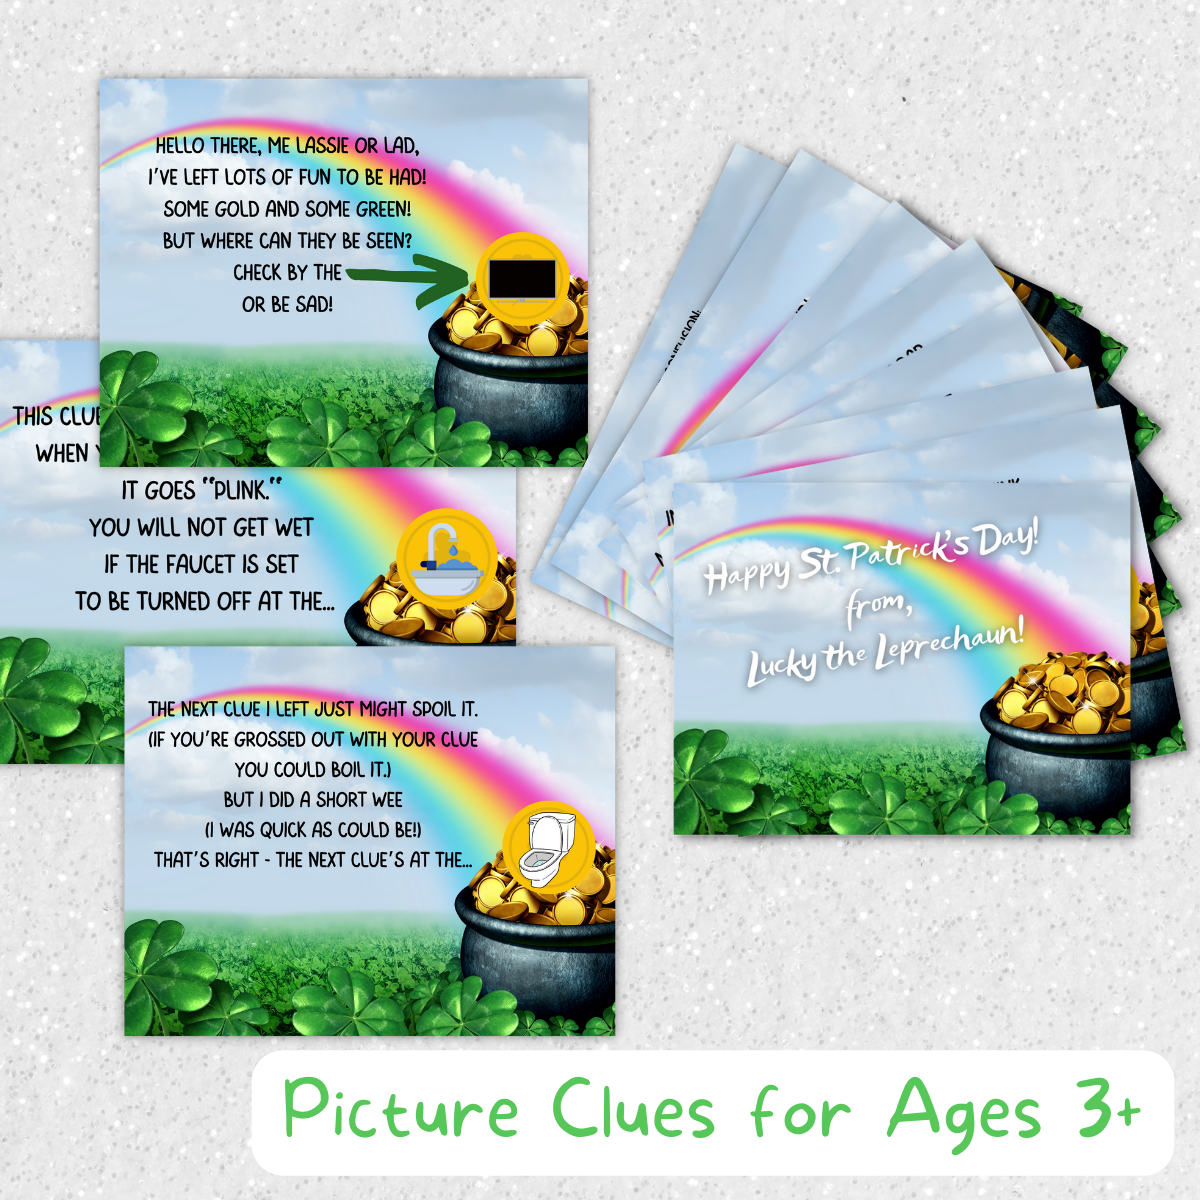 Treasure hunt cards display a rainbow leading to a pot of gold, where a gold scratch-off sticker reveals the location of the treasure hunt's next clue in picture form.